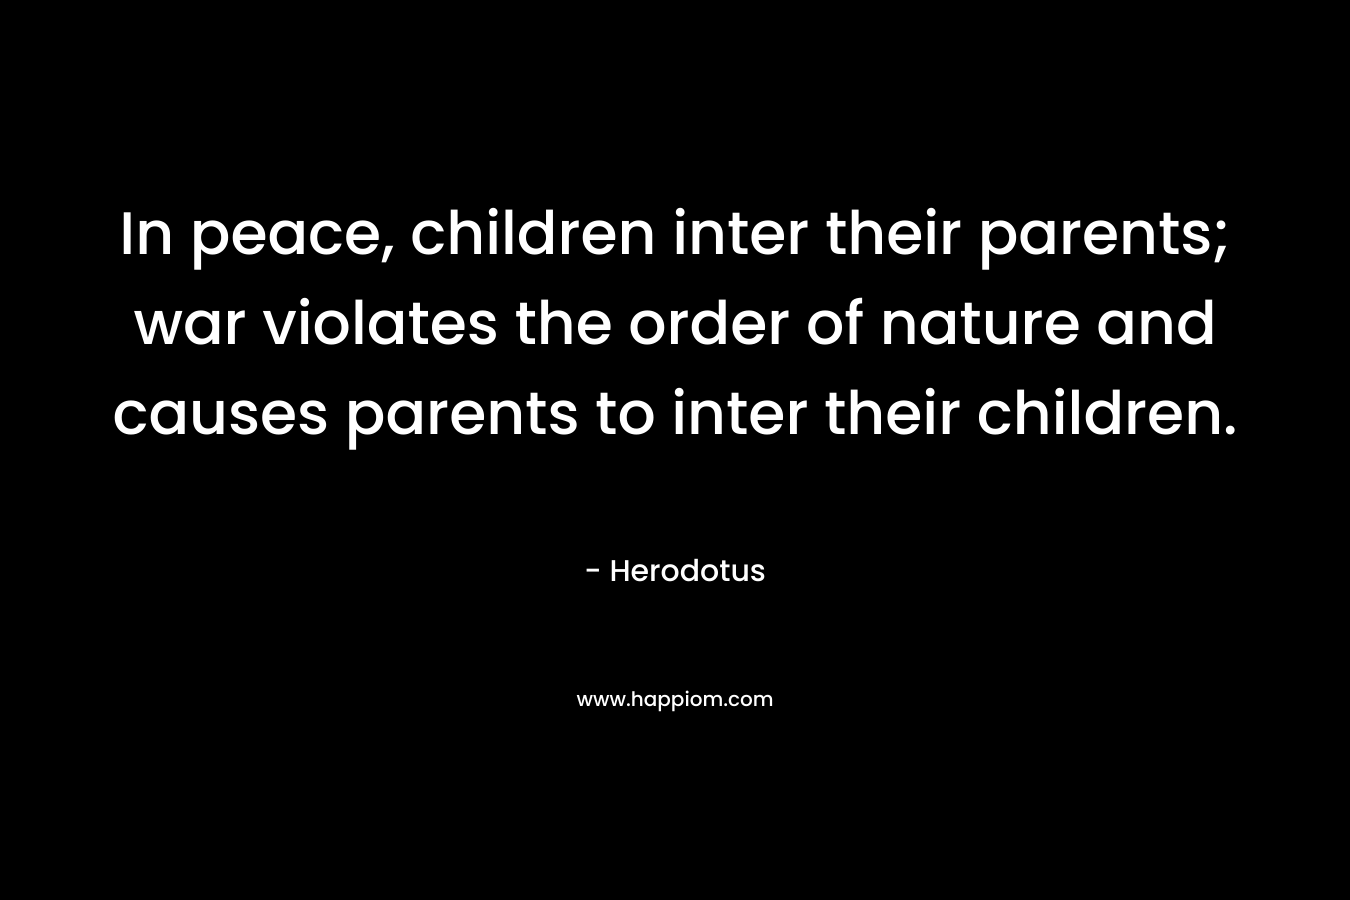 In peace, children inter their parents; war violates the order of nature and causes parents to inter their children.